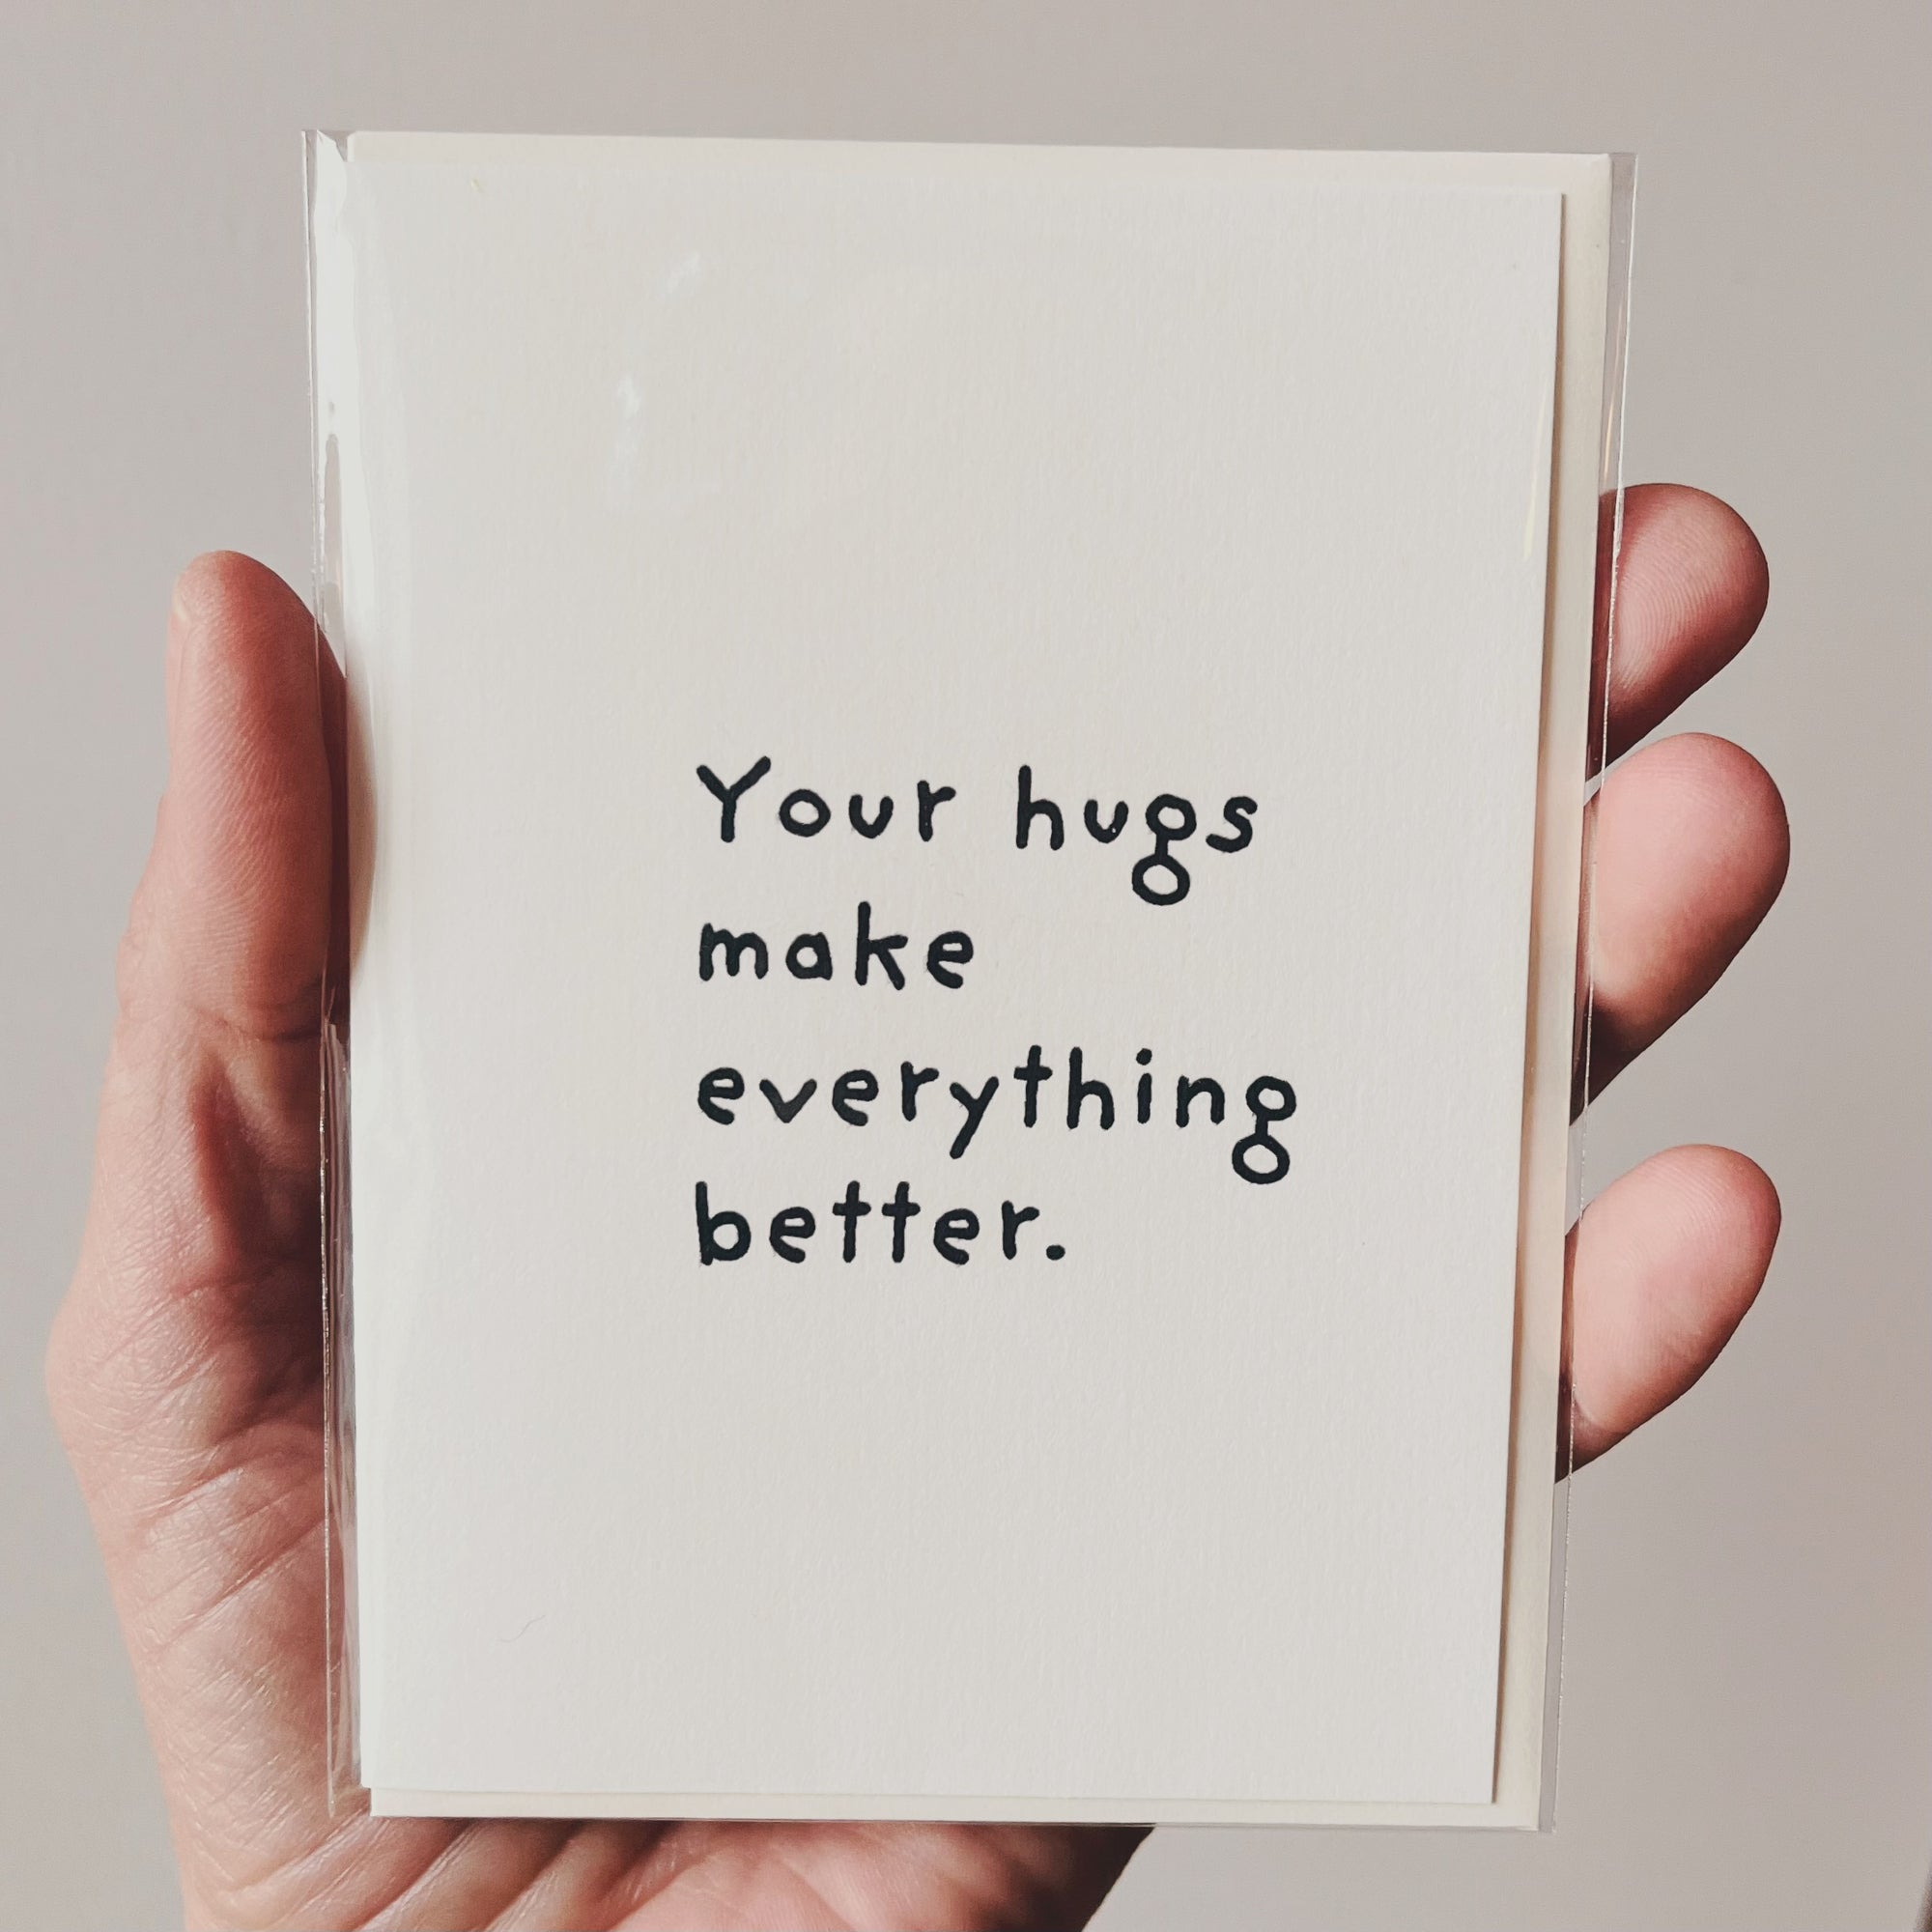 Your hugs make everything better.